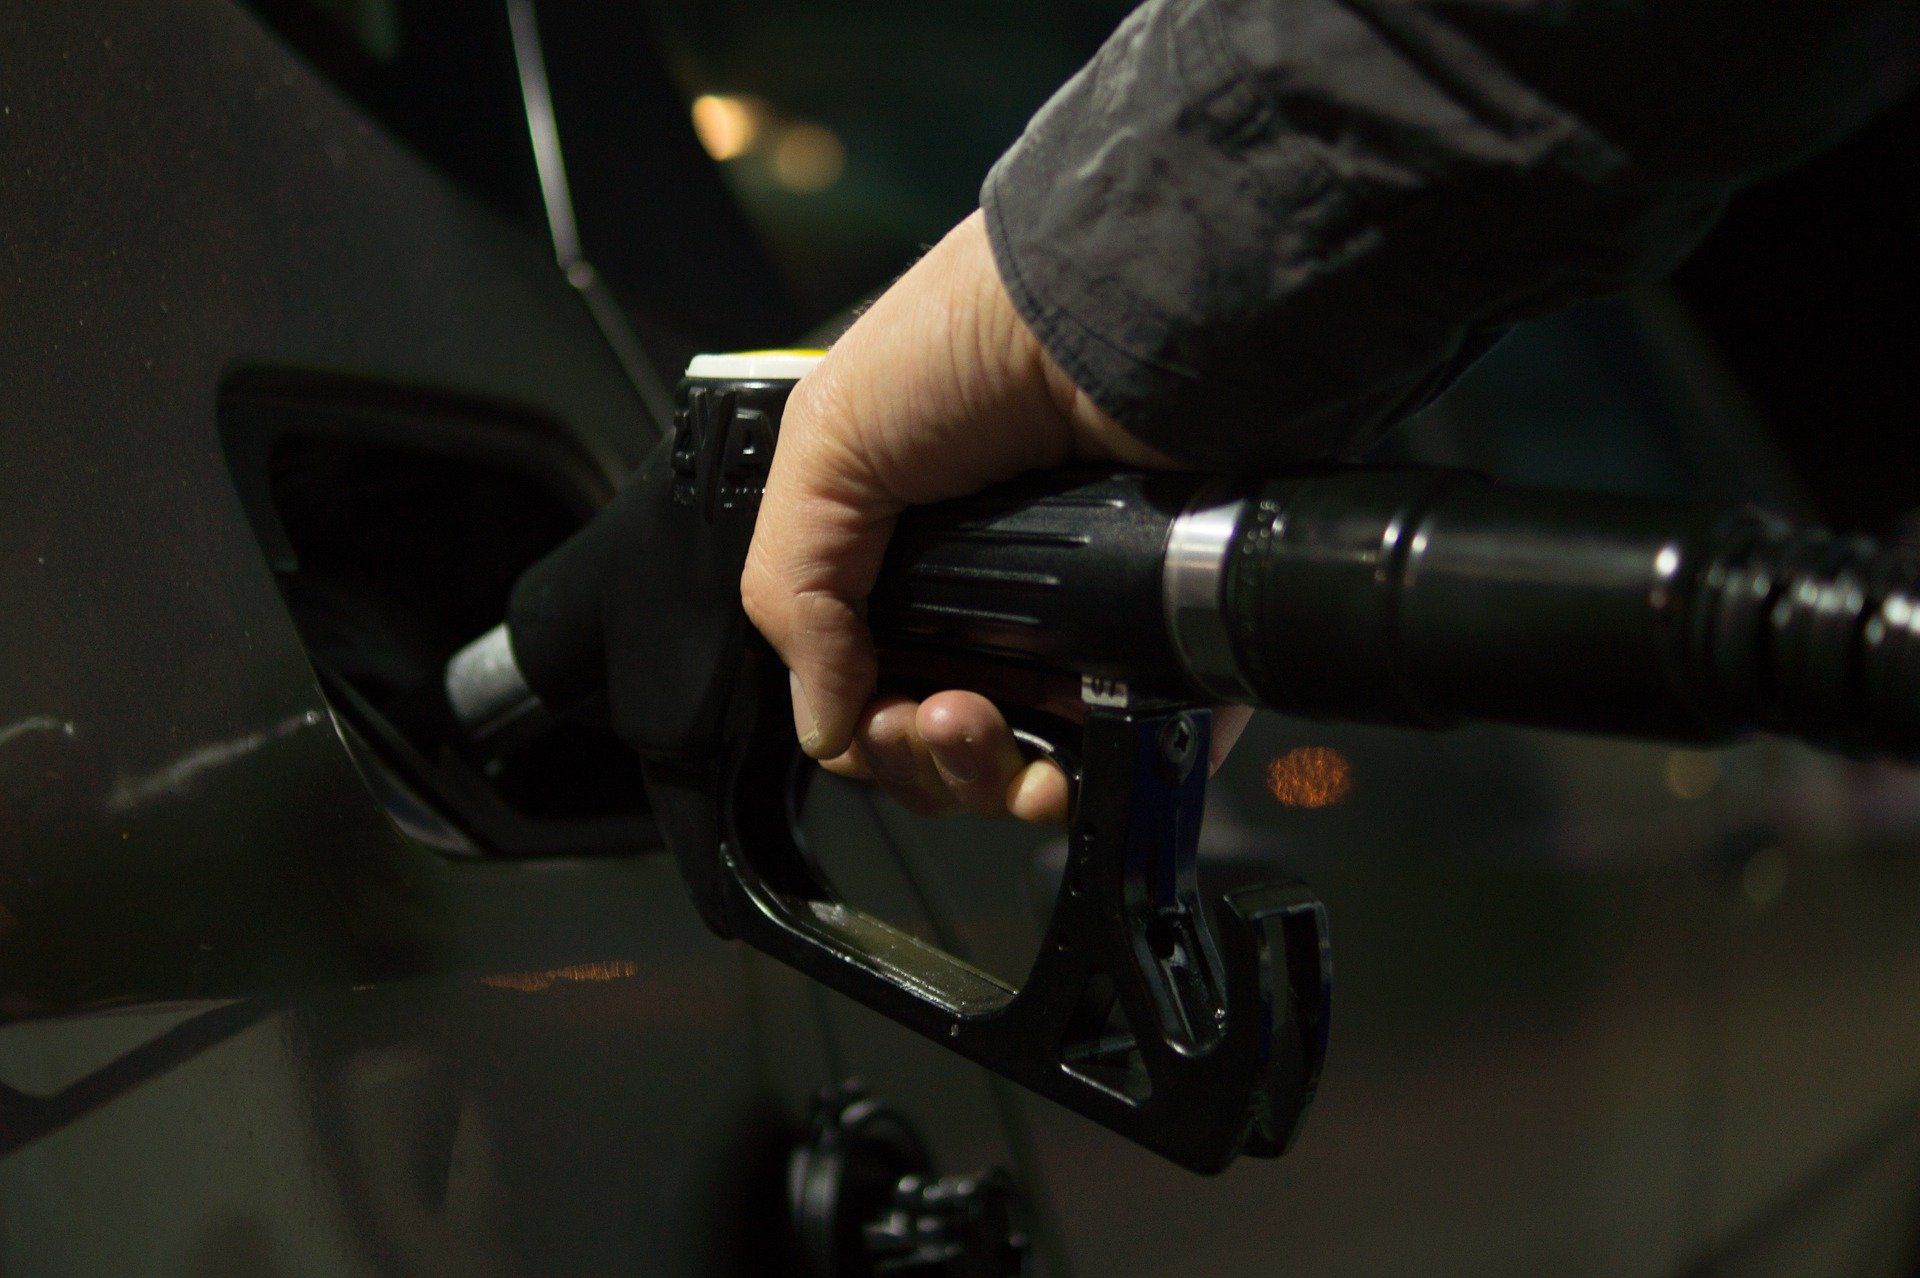 Fuel prices: Petrol priced at Rs 95.41, diesel Rs 86.67 in Delhi on February 8, 2022